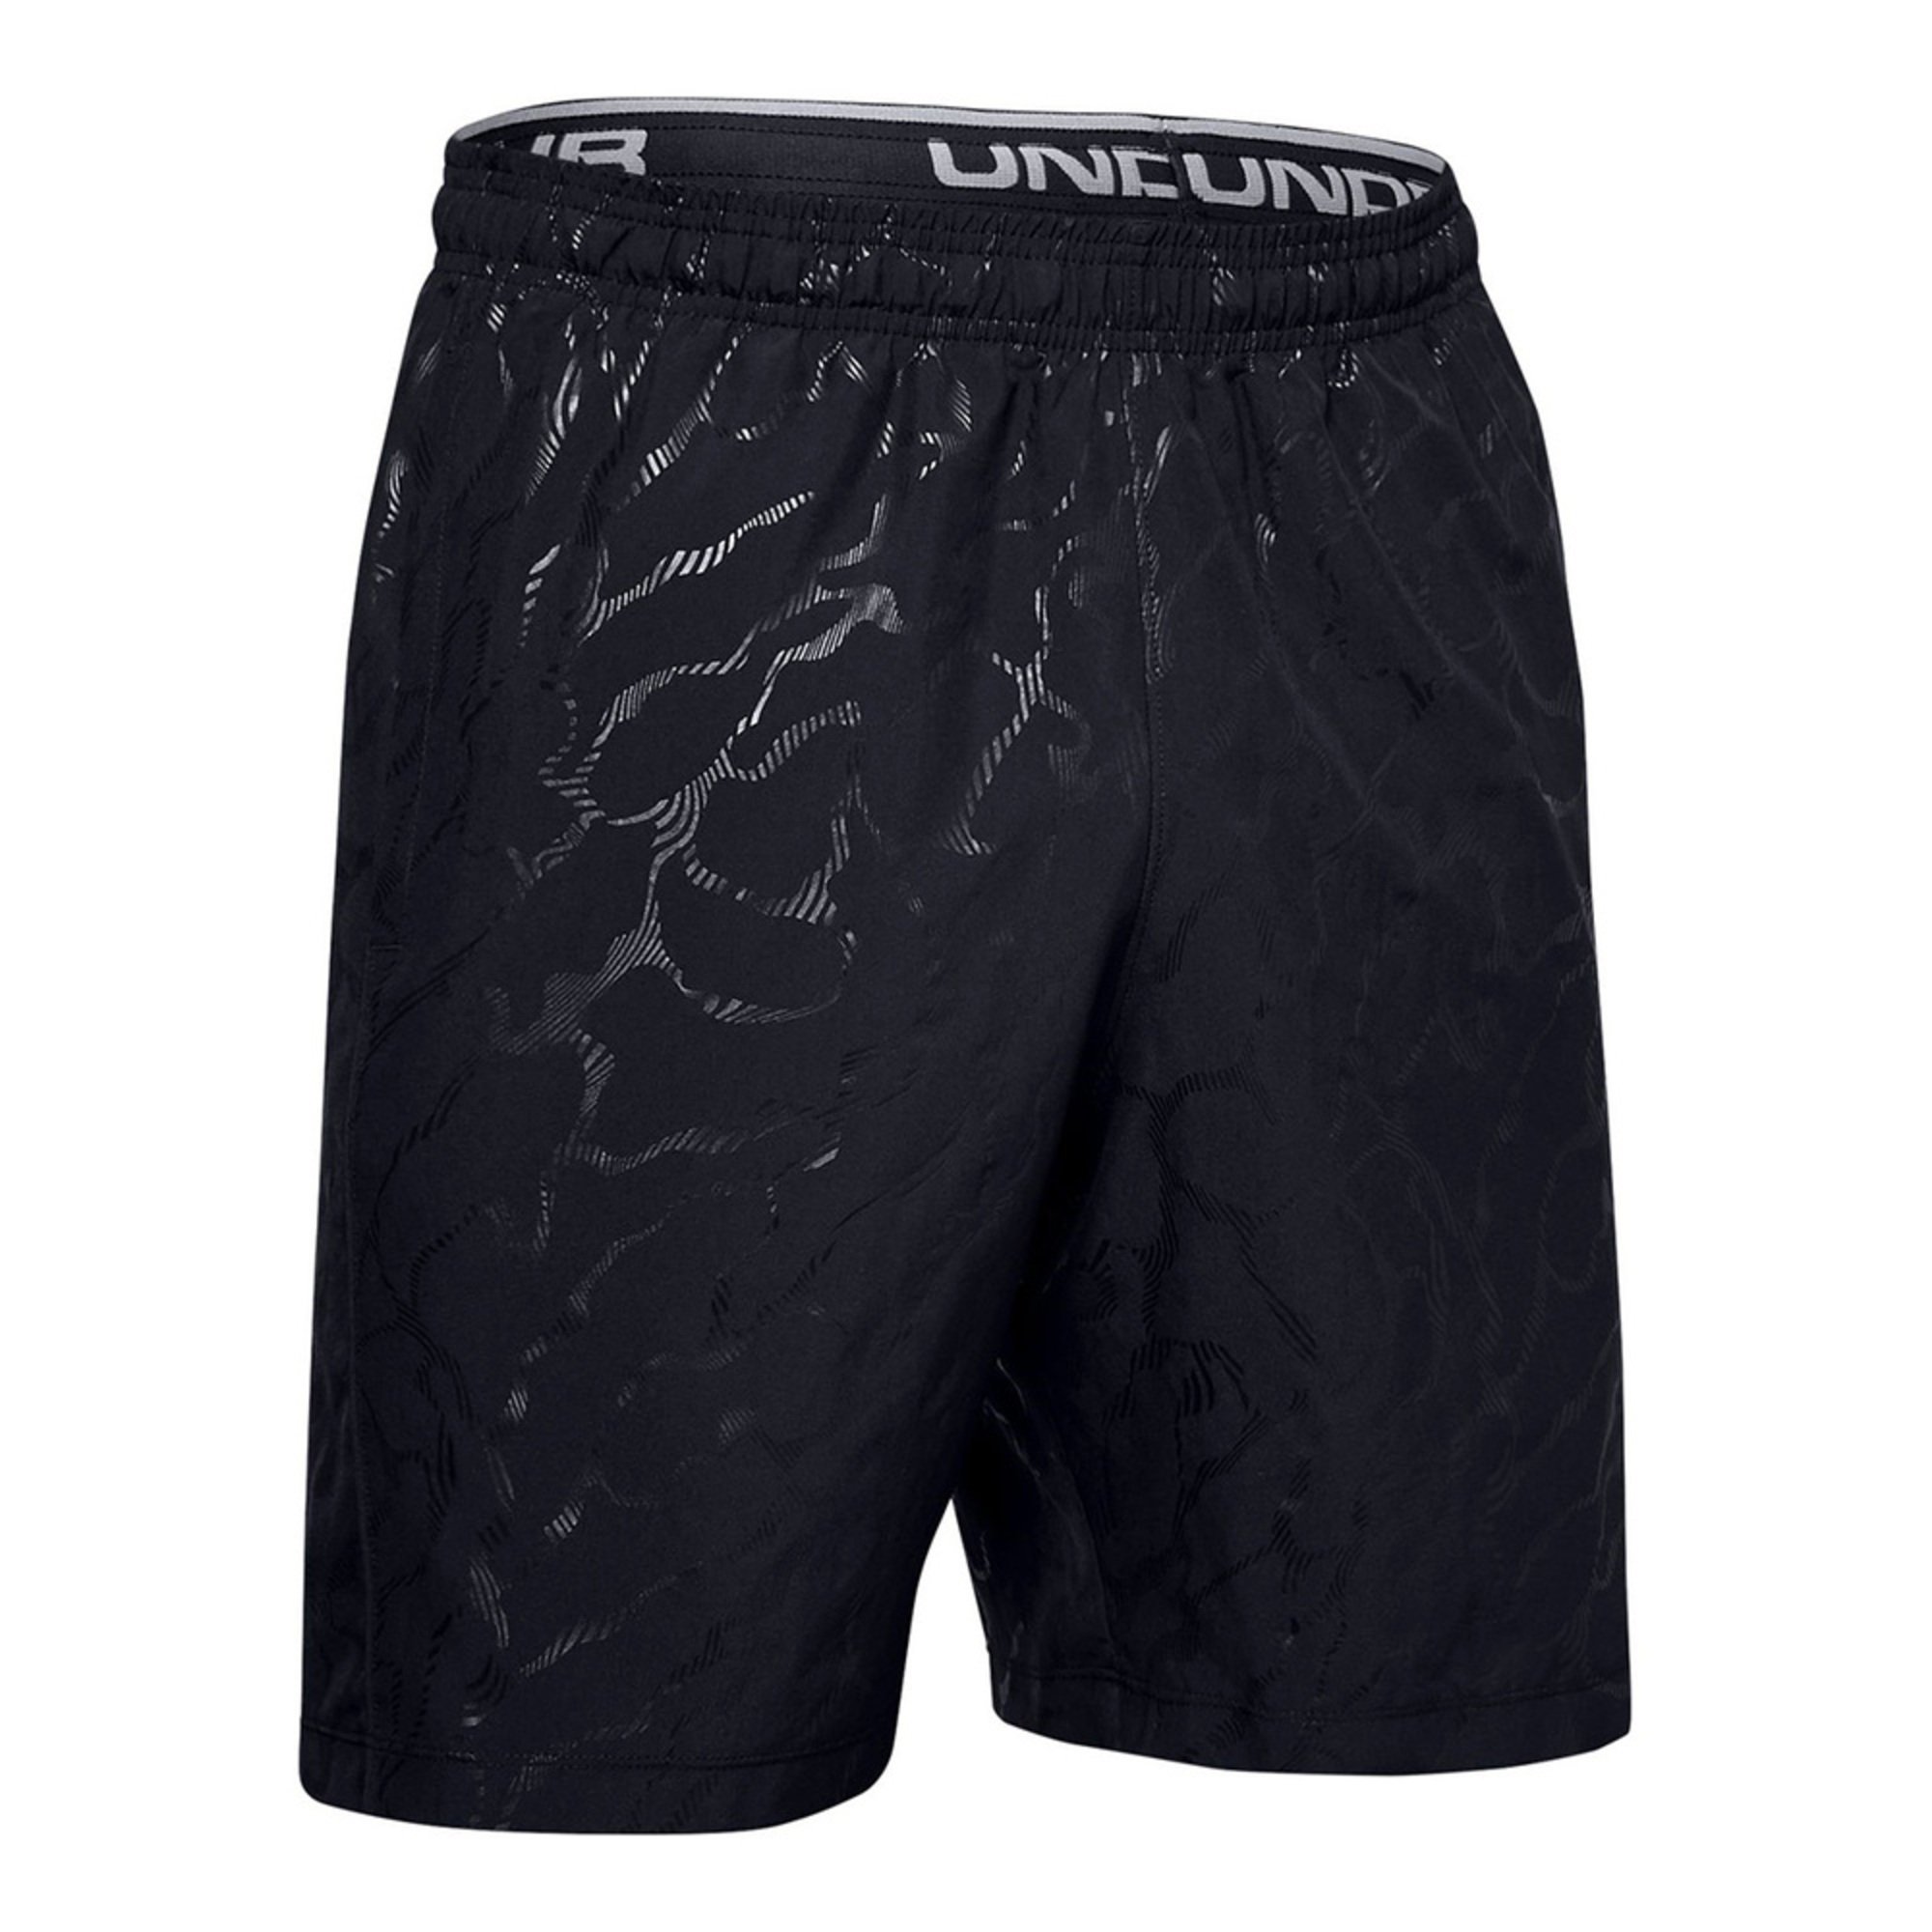 Under Armour Mens Woven Graphic Emboss Short Black | Active Shorts ...